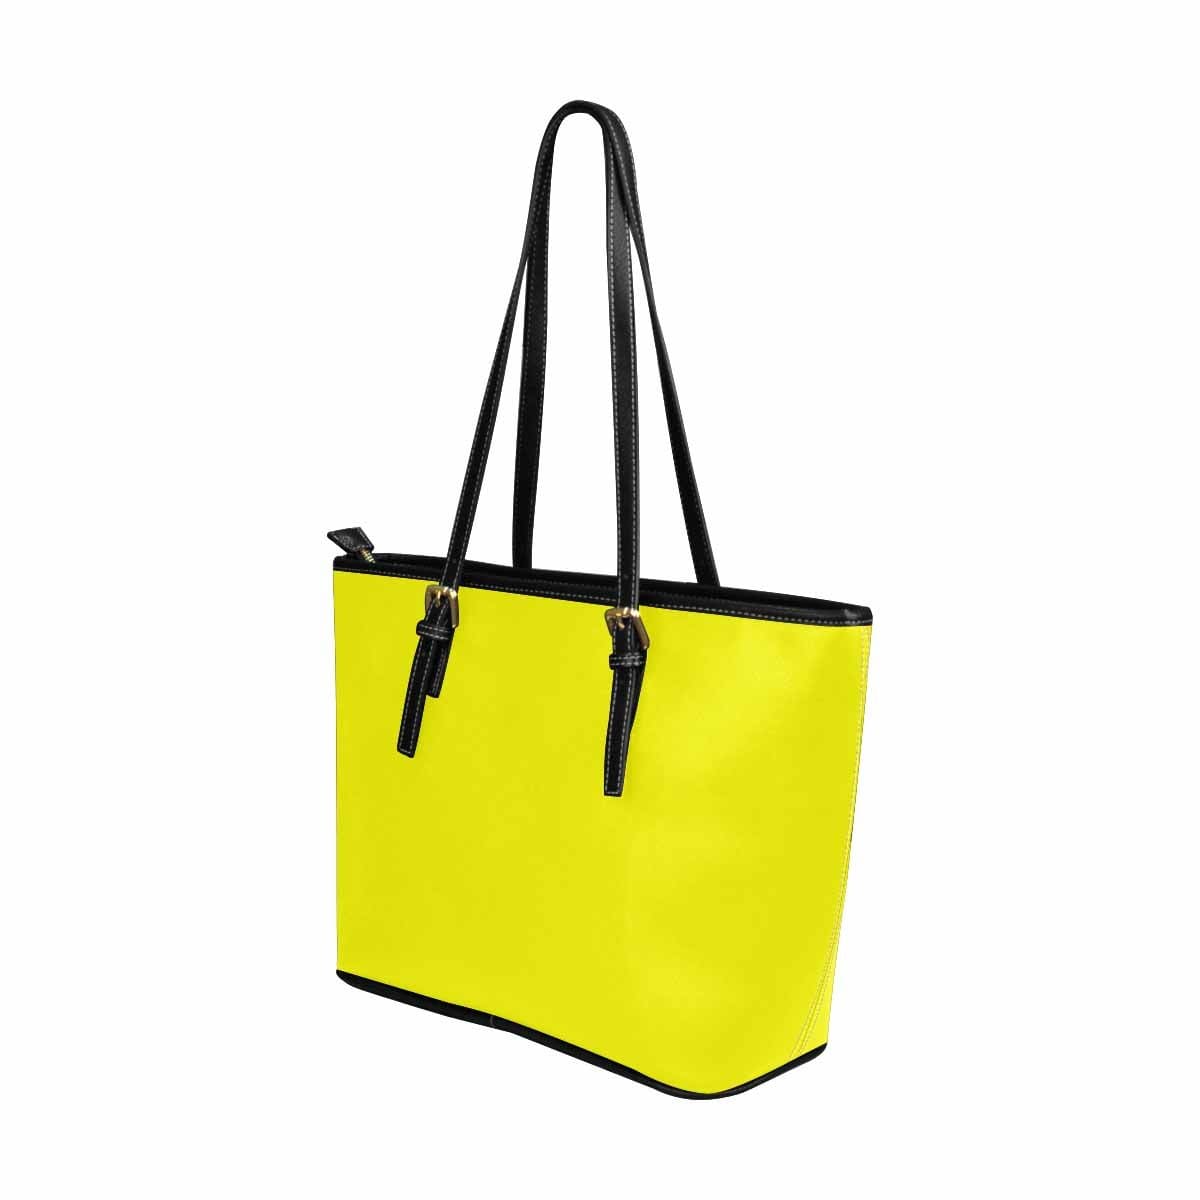 Large Leather Tote Shoulder Bag - Yellow - Bags | Leather Tote Bags